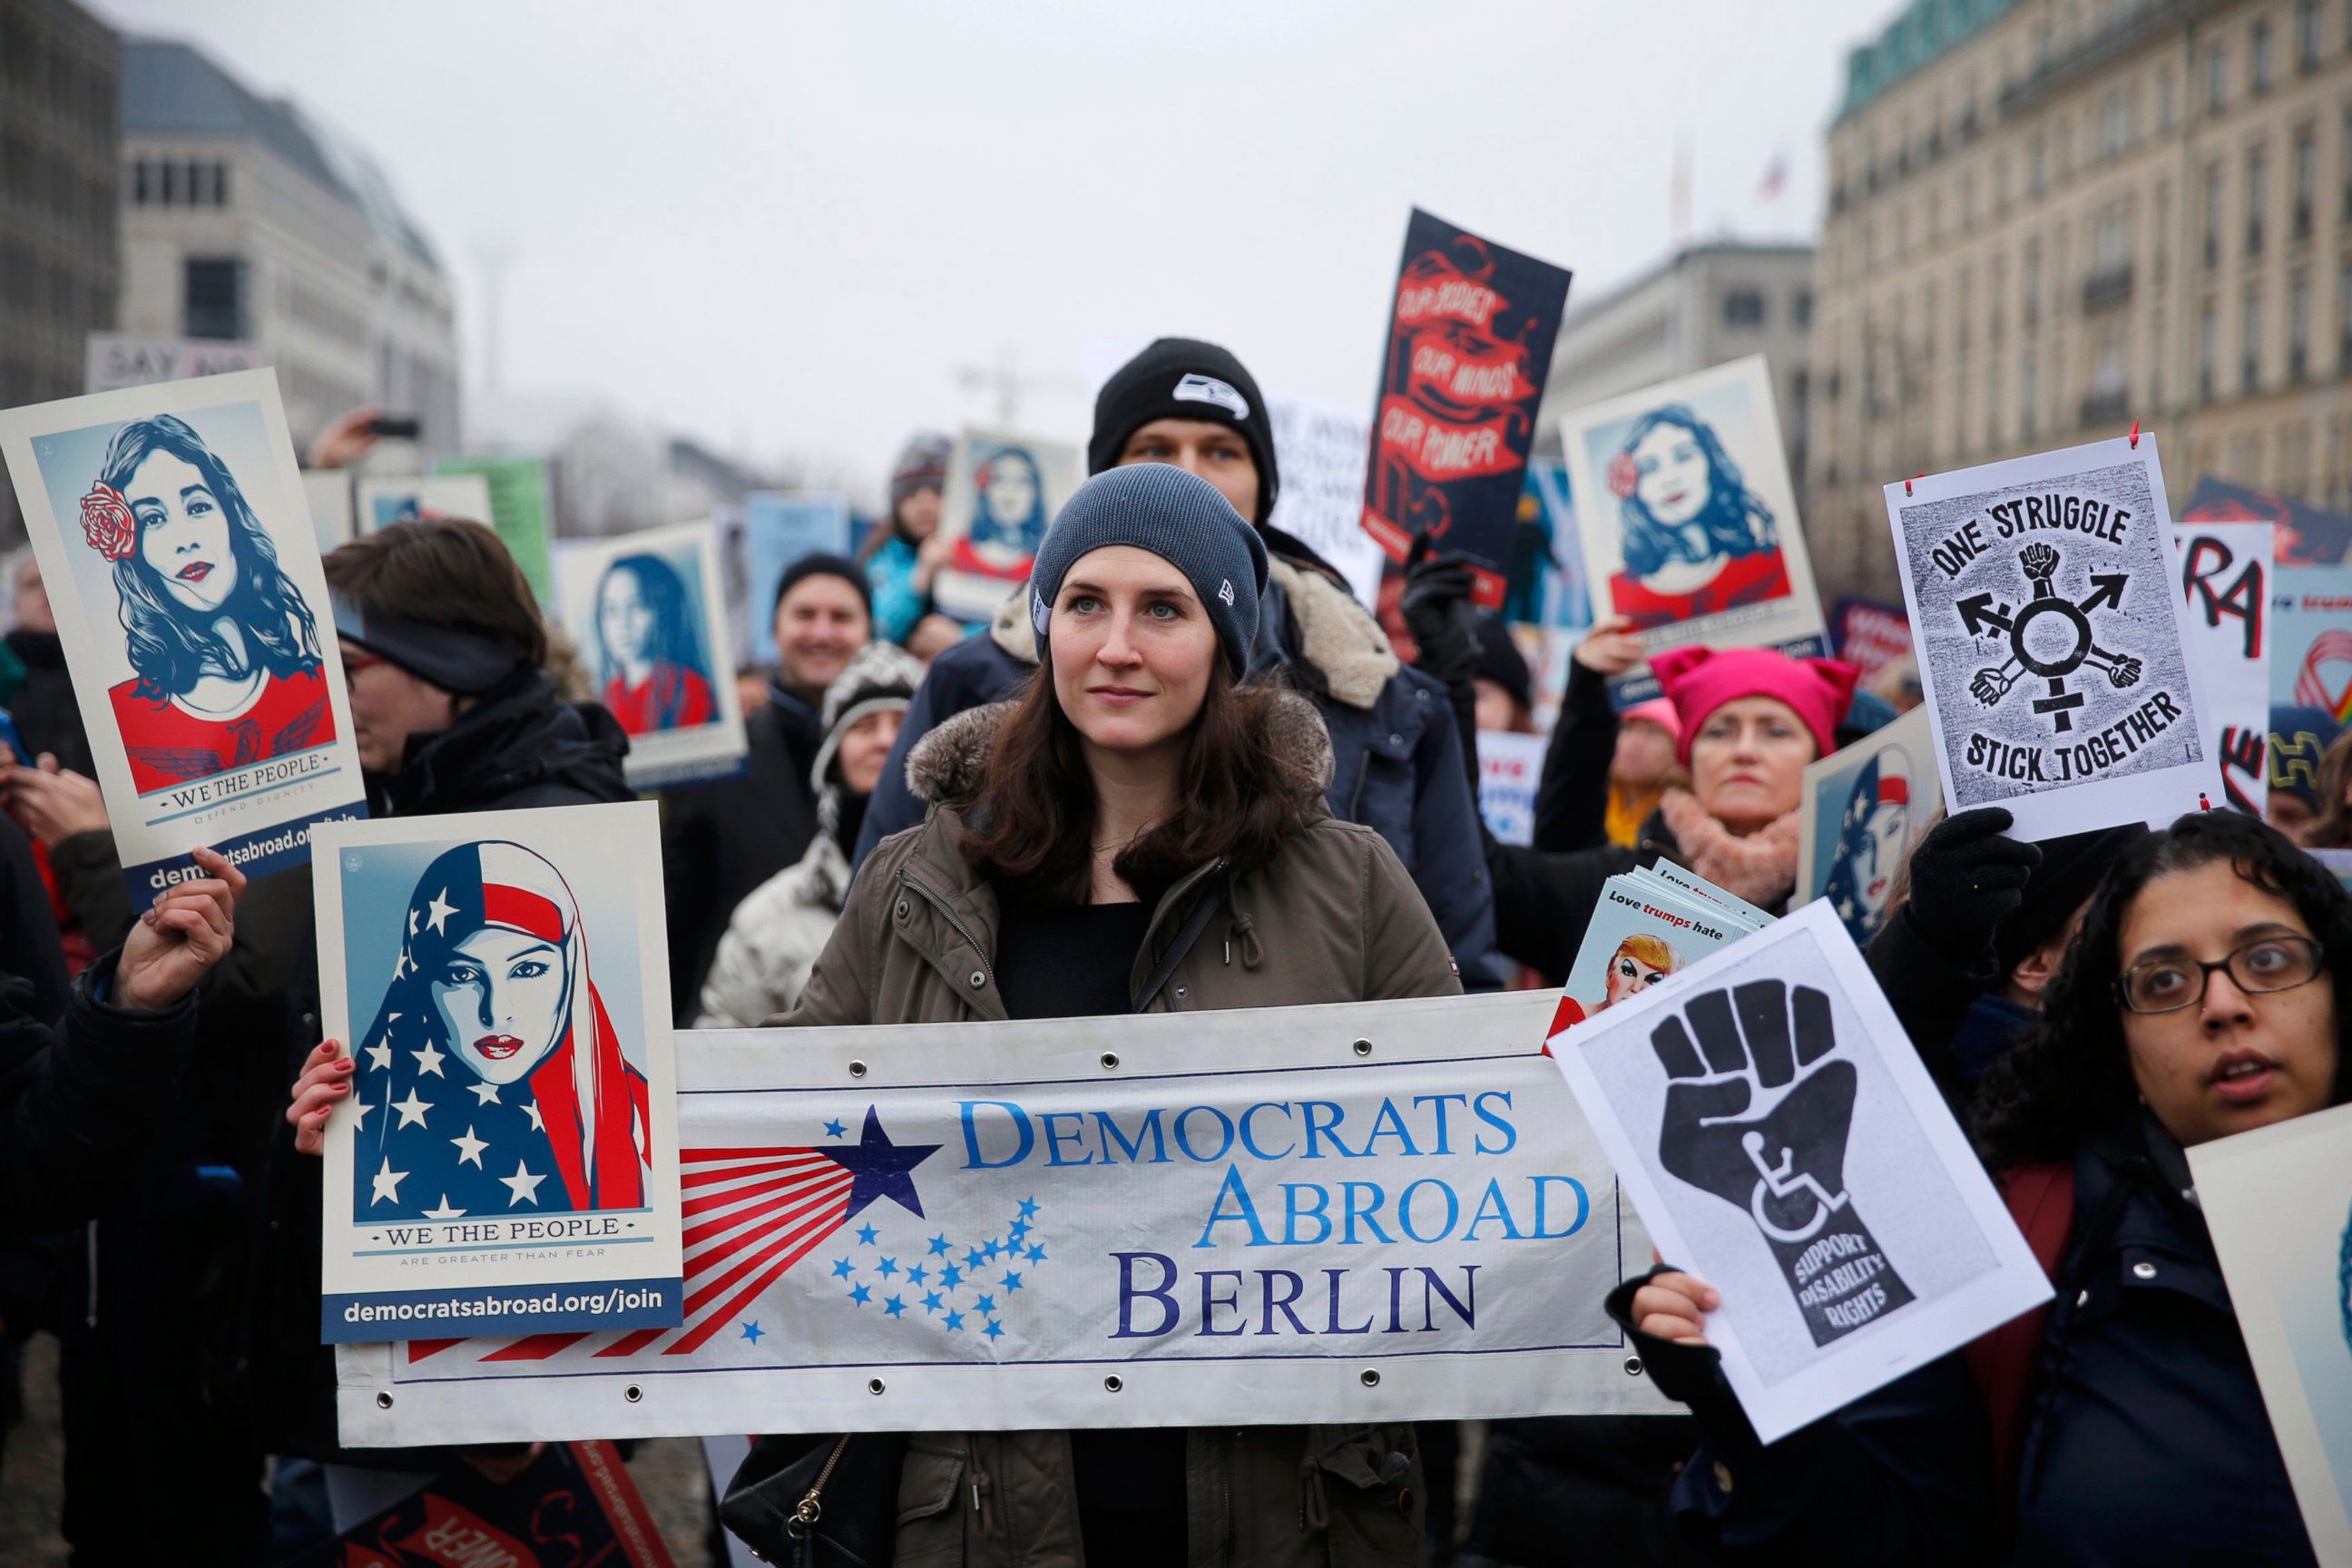 PHOTO: People gather in front of the U.S. Embassy on Pariser Platz beside Brandenburg Gate in solidarity with the Women's March in Washington and around the world, in Berlin, Germany, Jan. 21, 2017.  